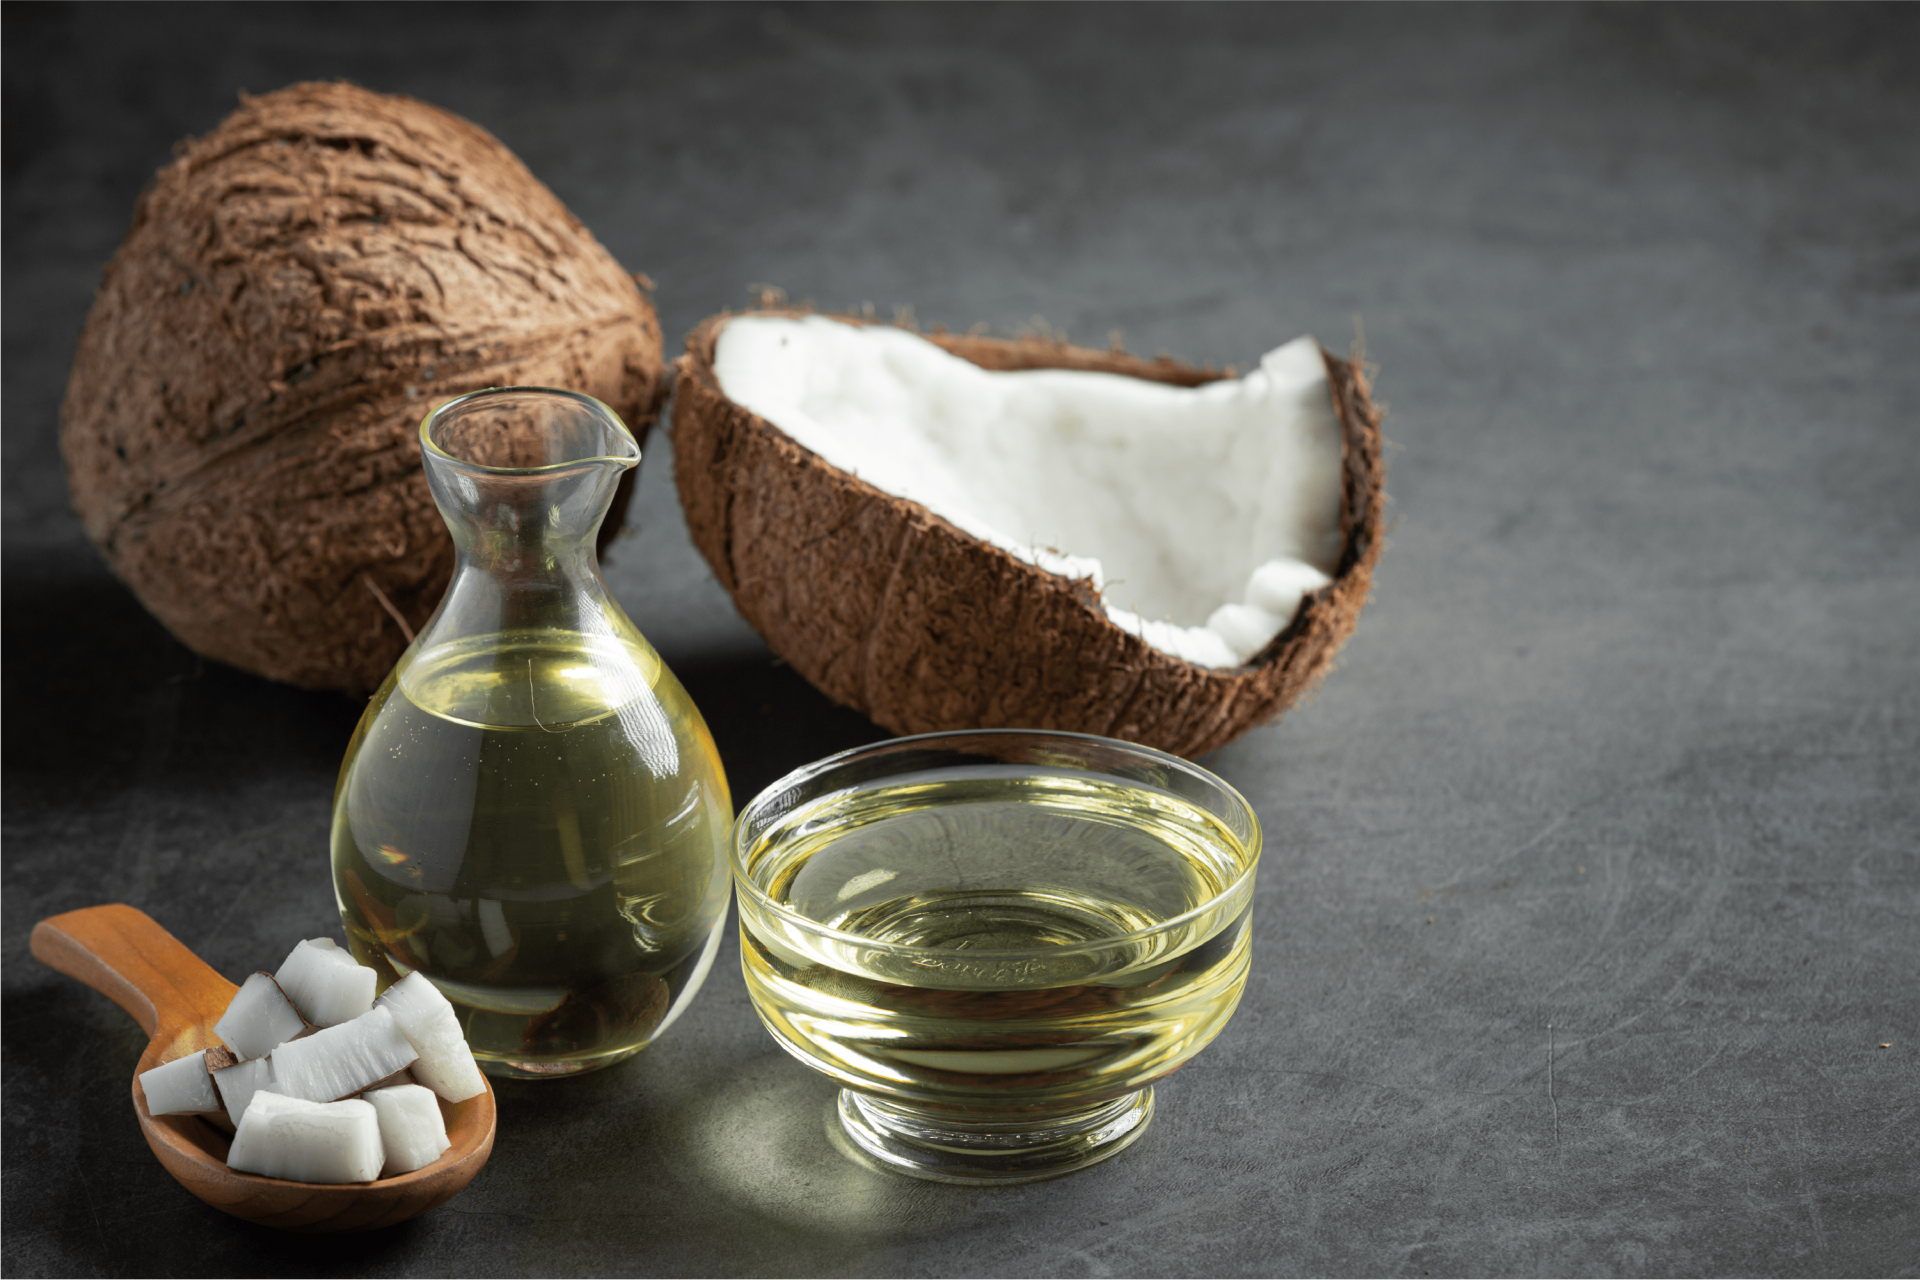 How to consume coconut oil effectively